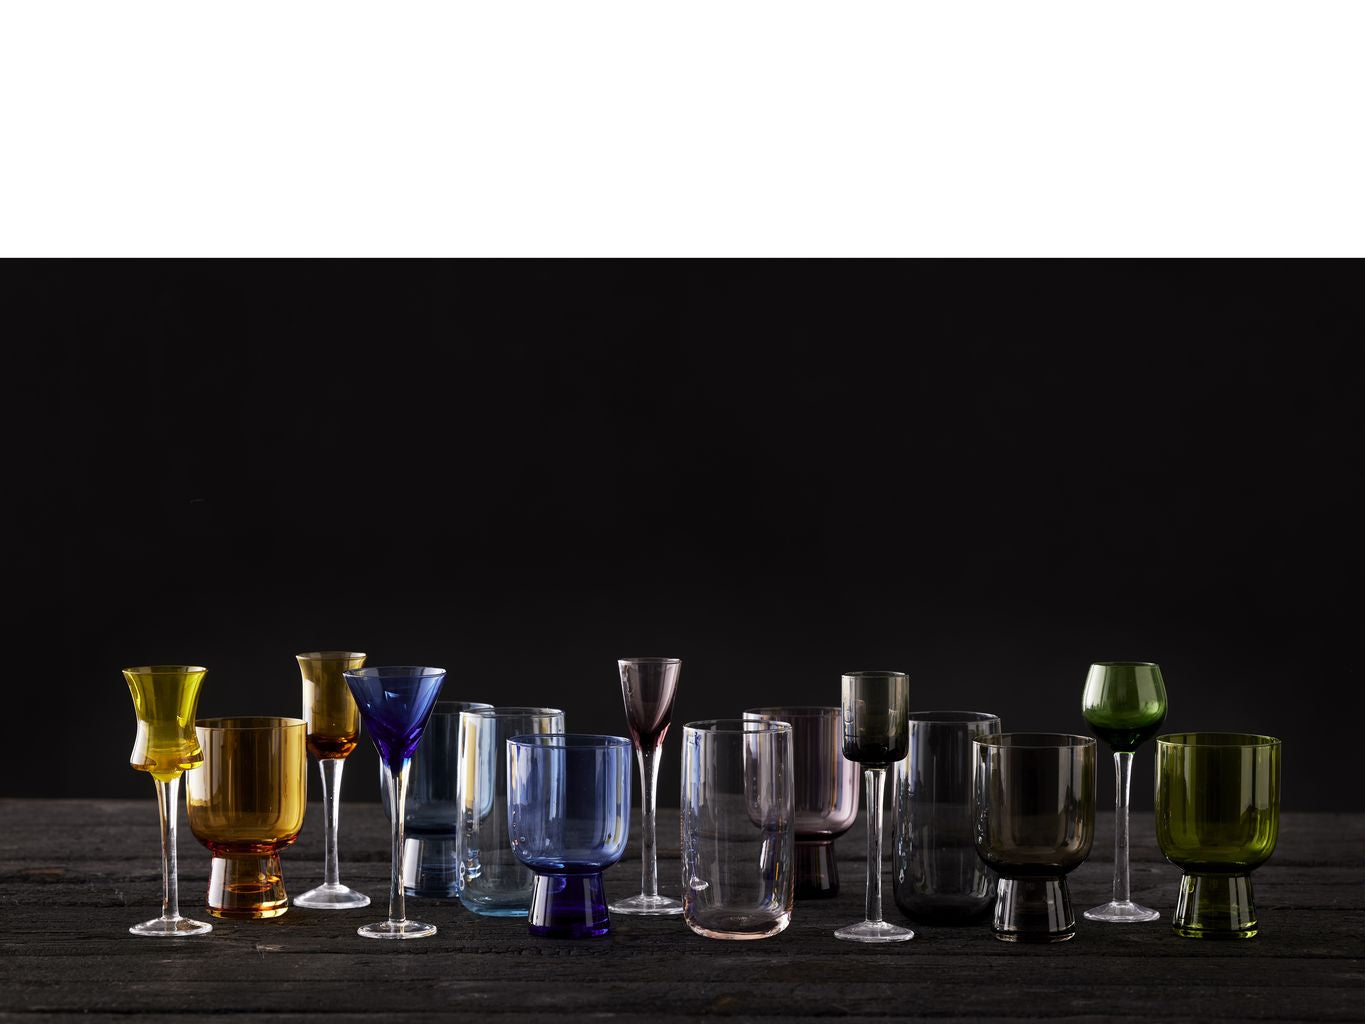 Lyngby Glas Schnapps glas diverse färger, 6 st.